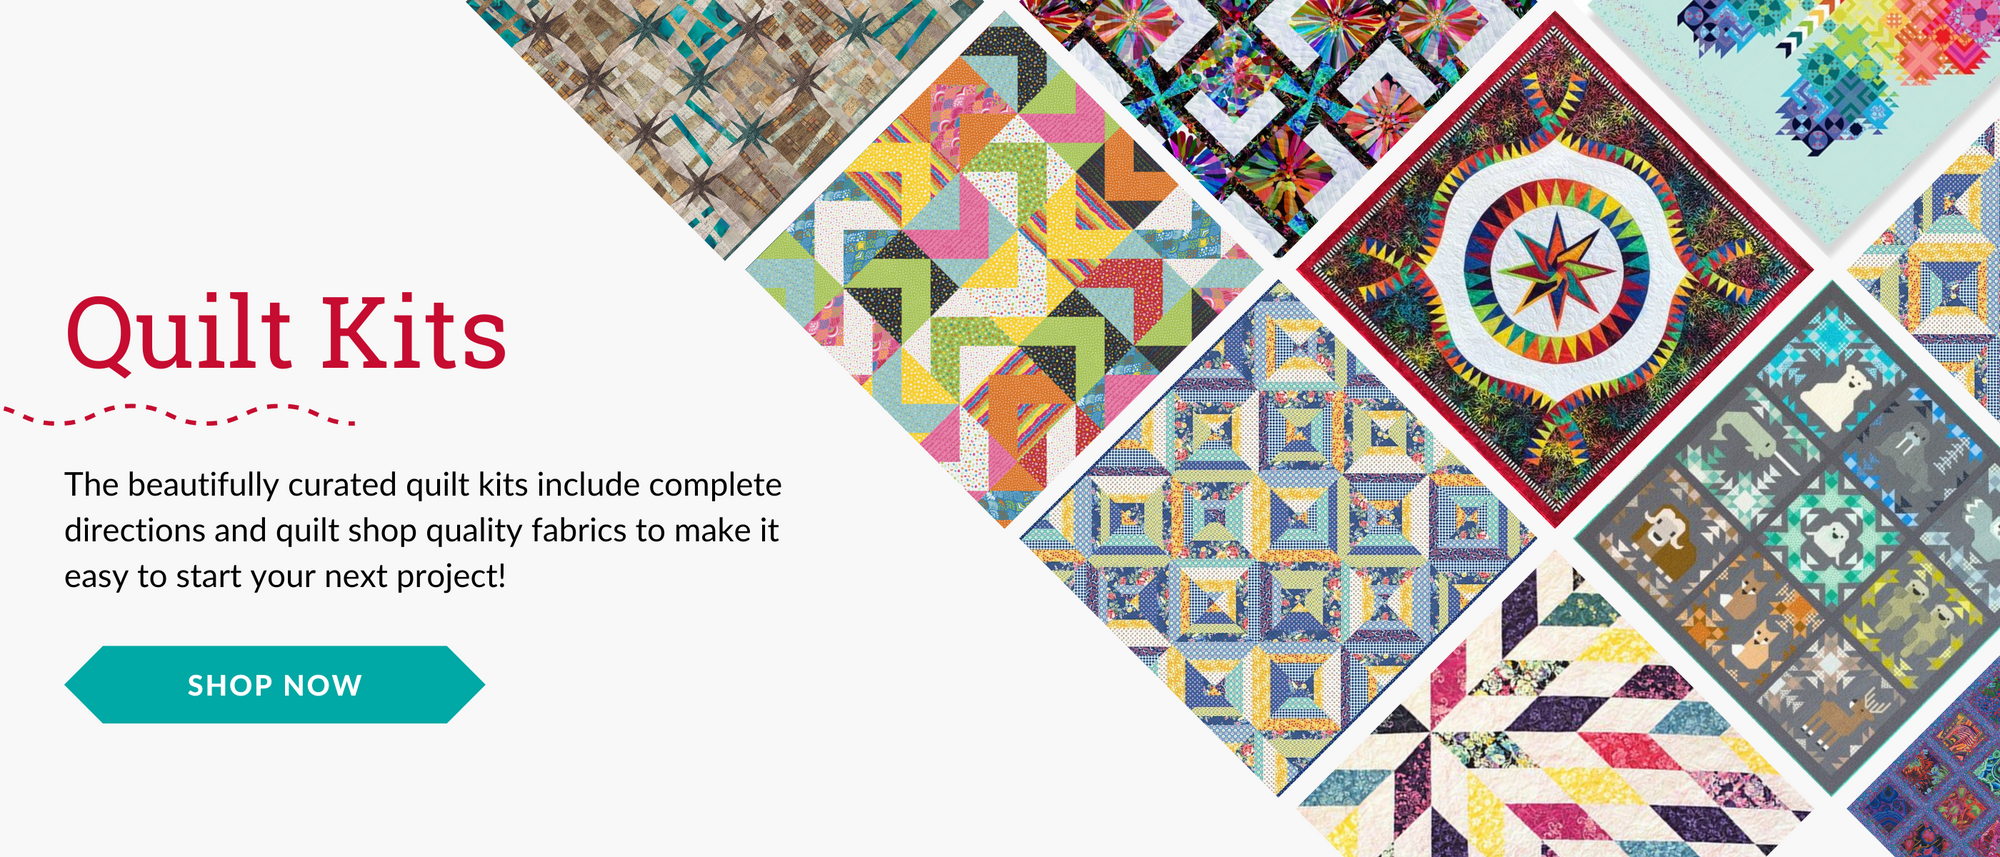 Collection of images of quilt kits offered shop quilt kits